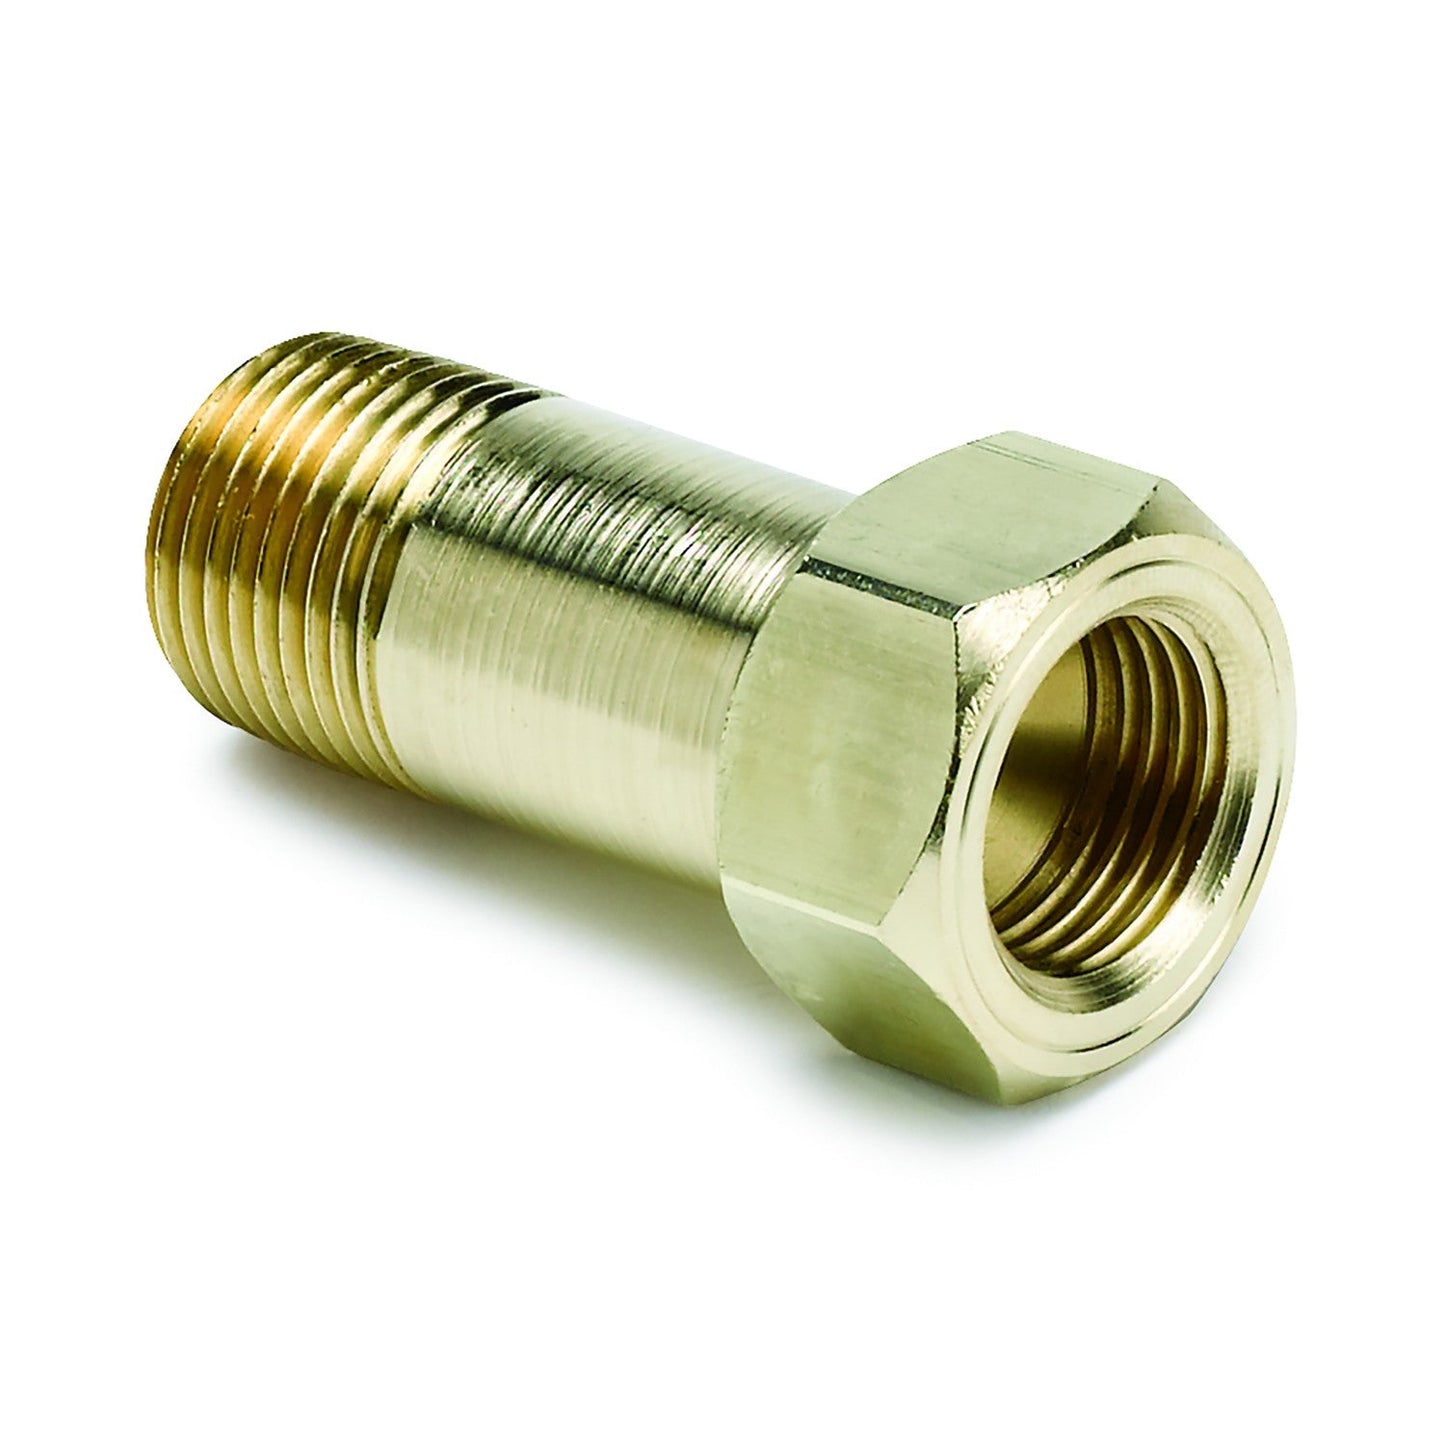 AutoMeter - FITTING, ADAPTER, 3/8" NPT MALE, EXTENSION, BRASS, FOR MECH. TEMP. GAUGE (2271)